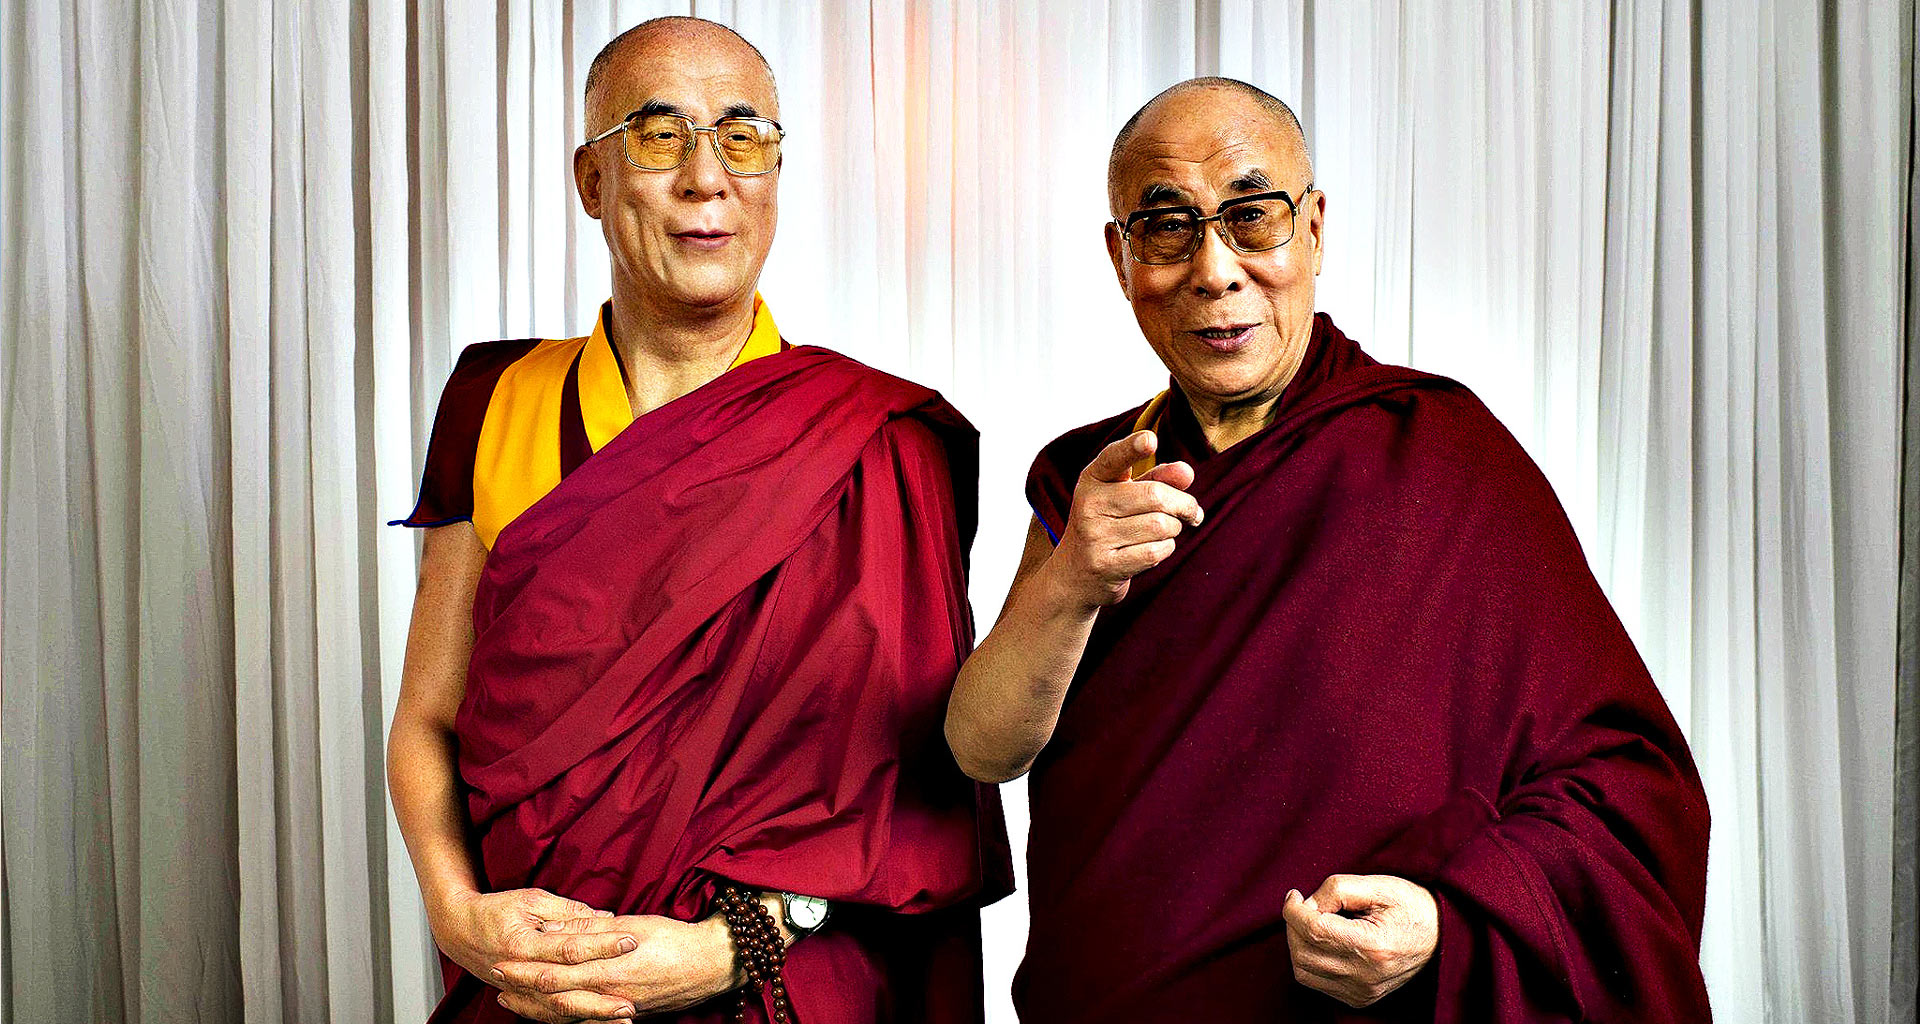 Dalai Lama Hd Wallpaper - Dalai Lama , HD Wallpaper & Backgrounds